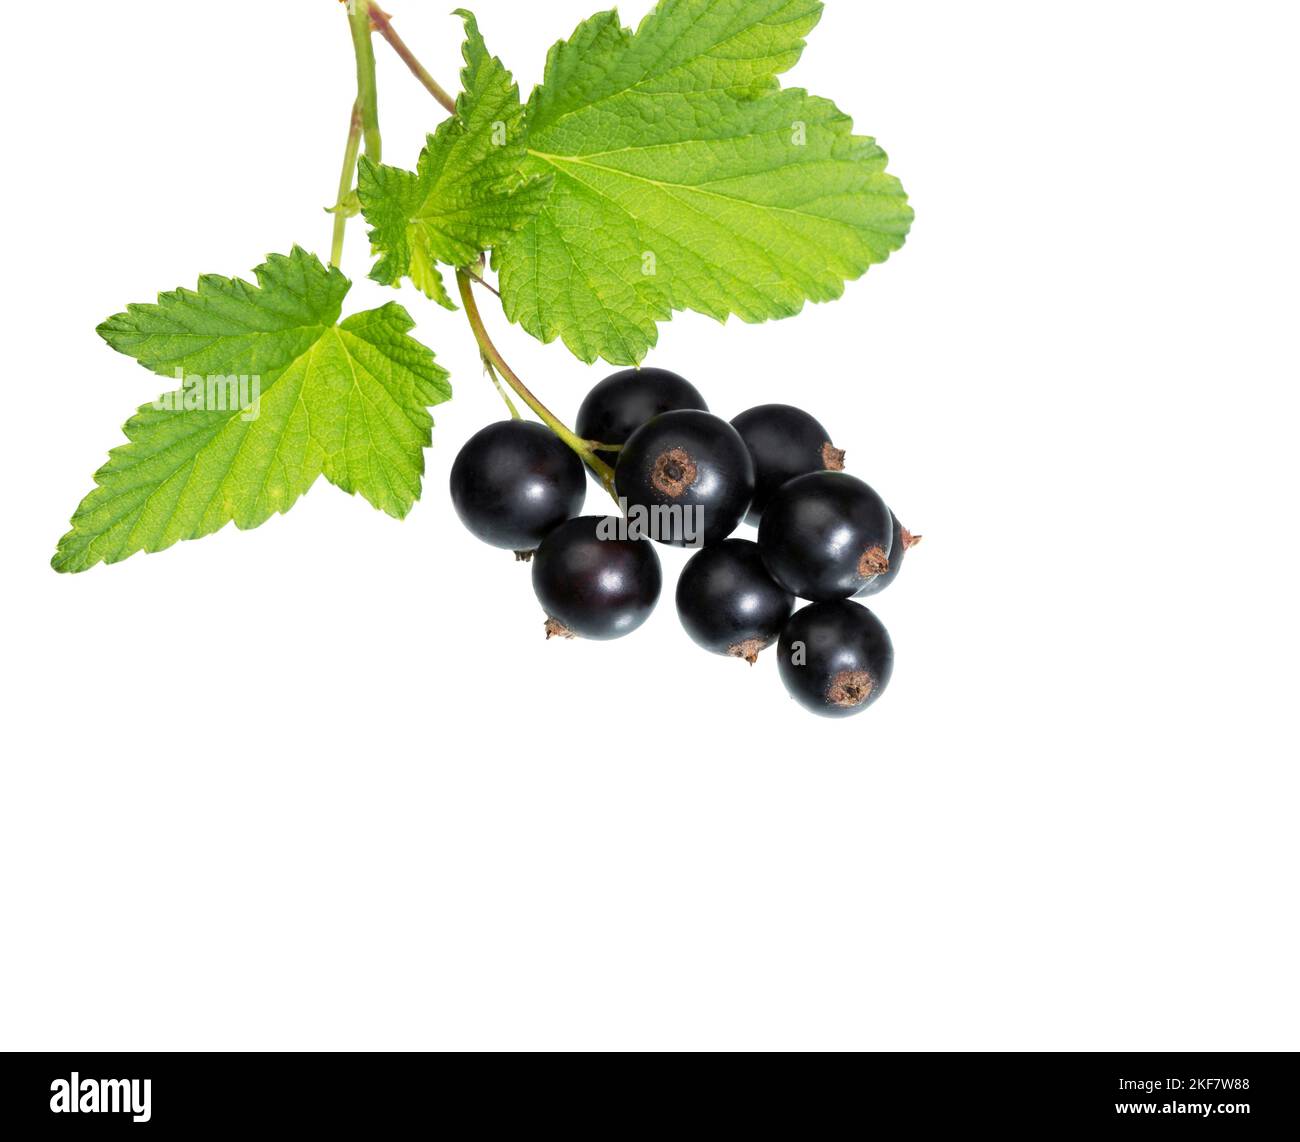 Currant branch. Black currant with leaves isolated on white. Stock Photo